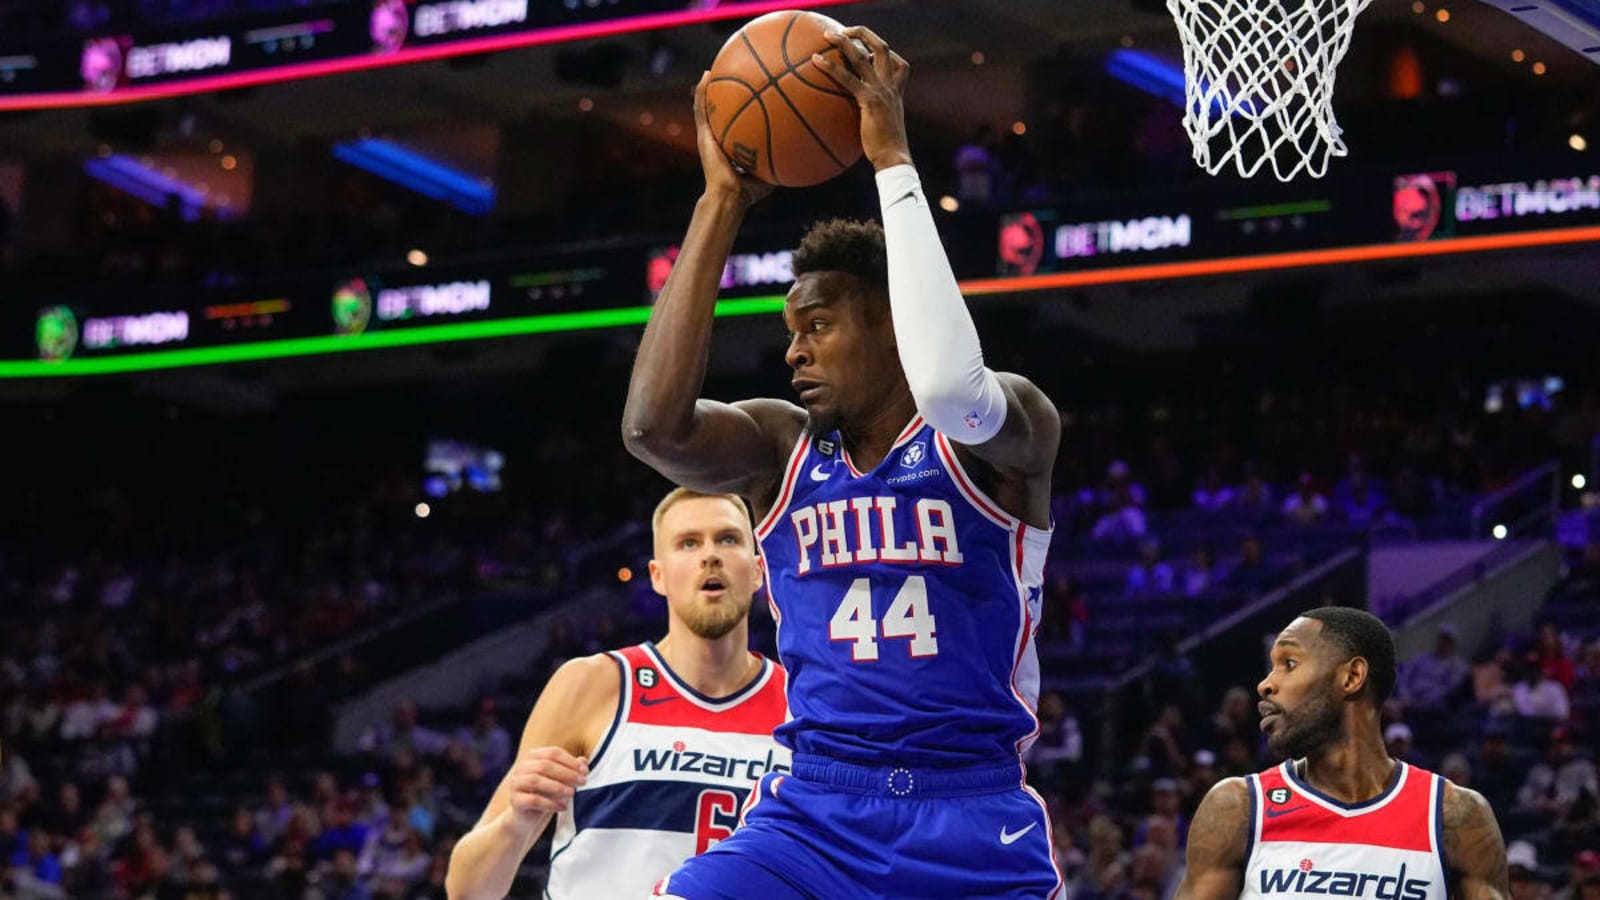 Sixers’ Paul Reed Pulls Up, Gets Some Buckets In Philly Pro-AM